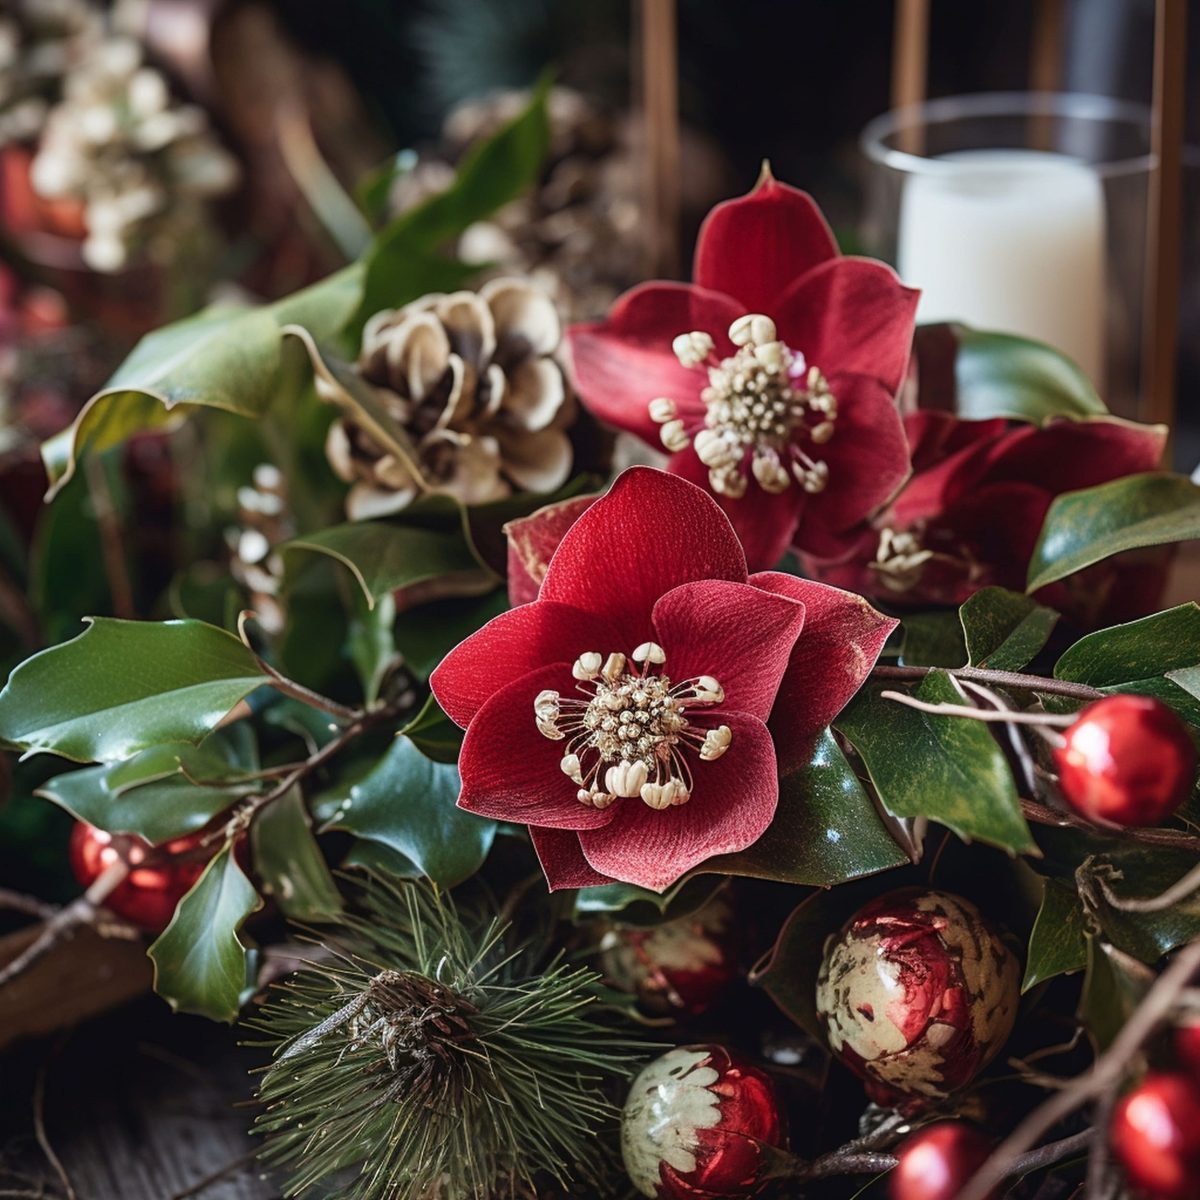 Marron Christmas Rose Plant Next to Pine Cones and Red Christmas Globes